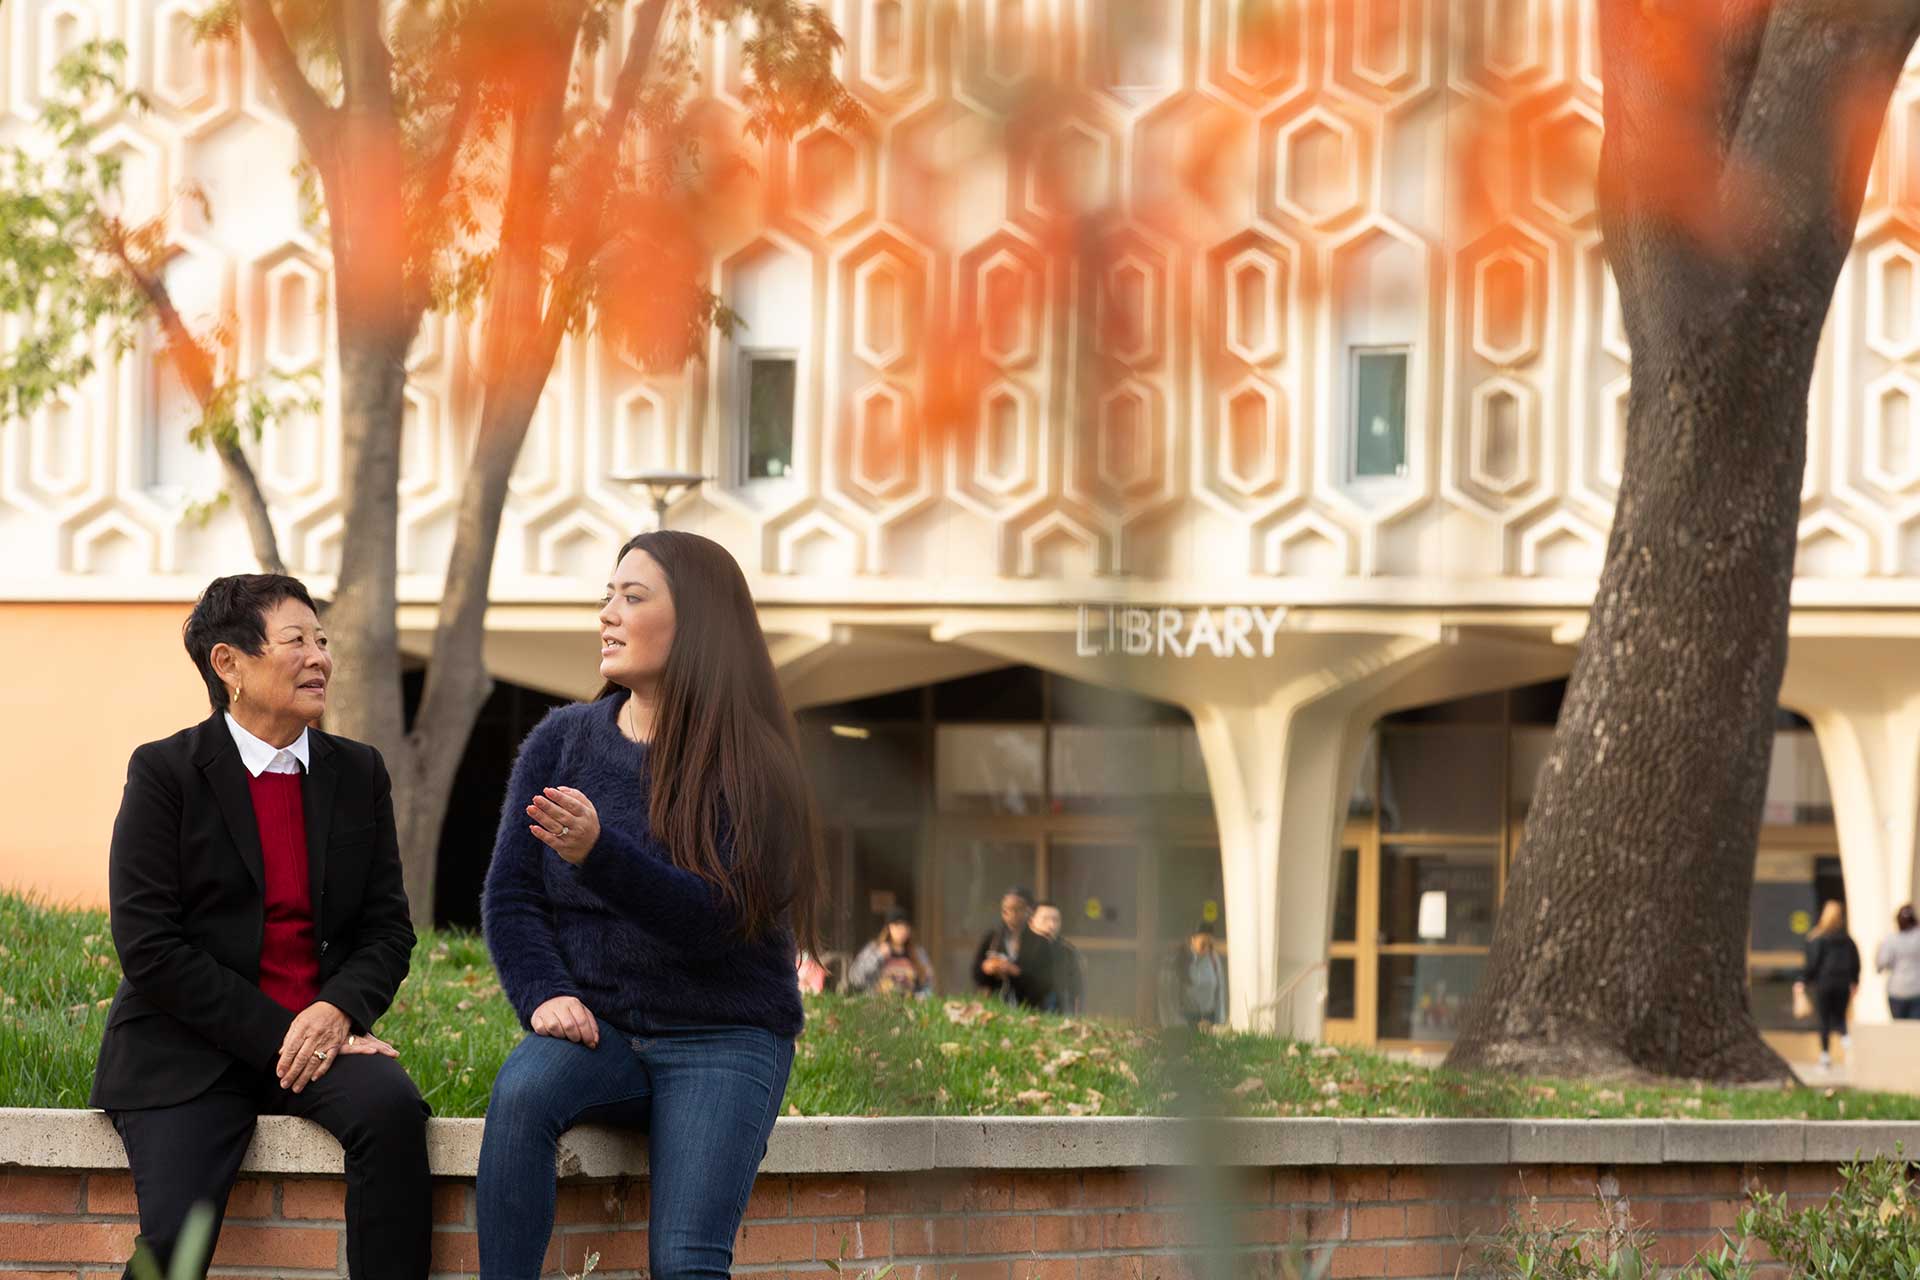 Janice Jeng and Ginny Oshiro sit and talk in front of library